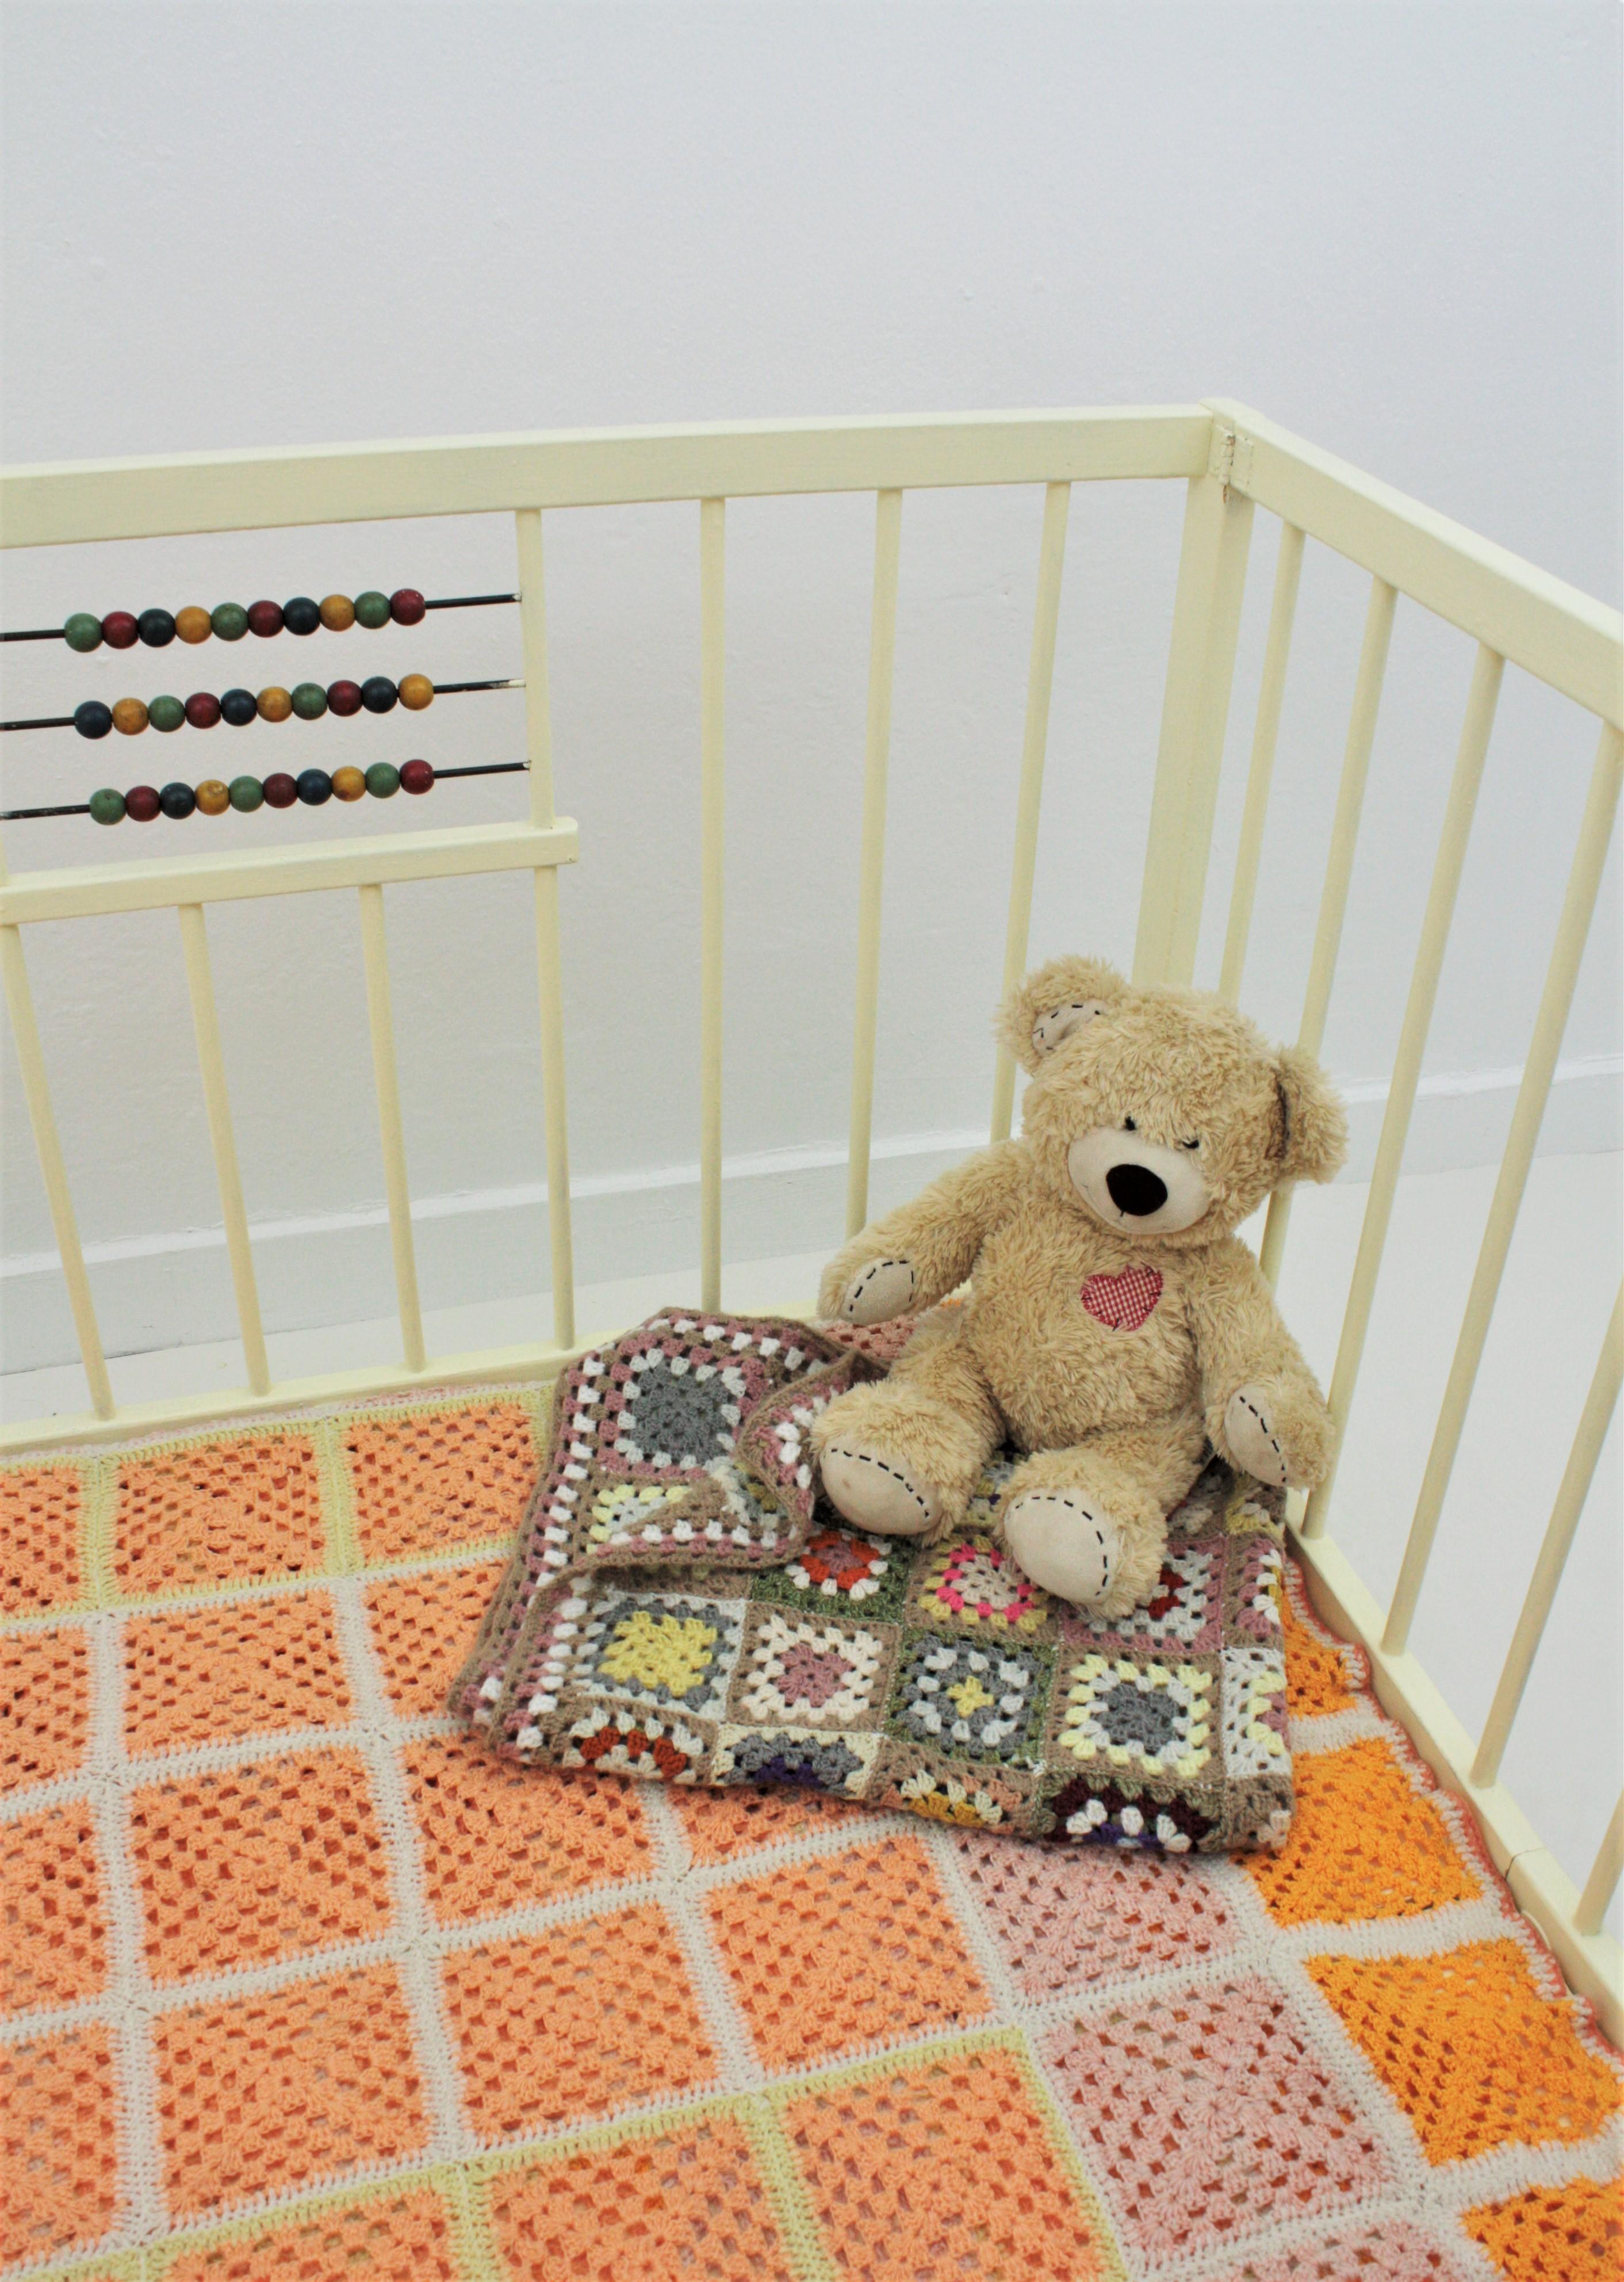 Spanish 1950s Folding Wooden Childs Playpen with Beads Abacus Toy In Good Condition For Sale In Barcelona, ES